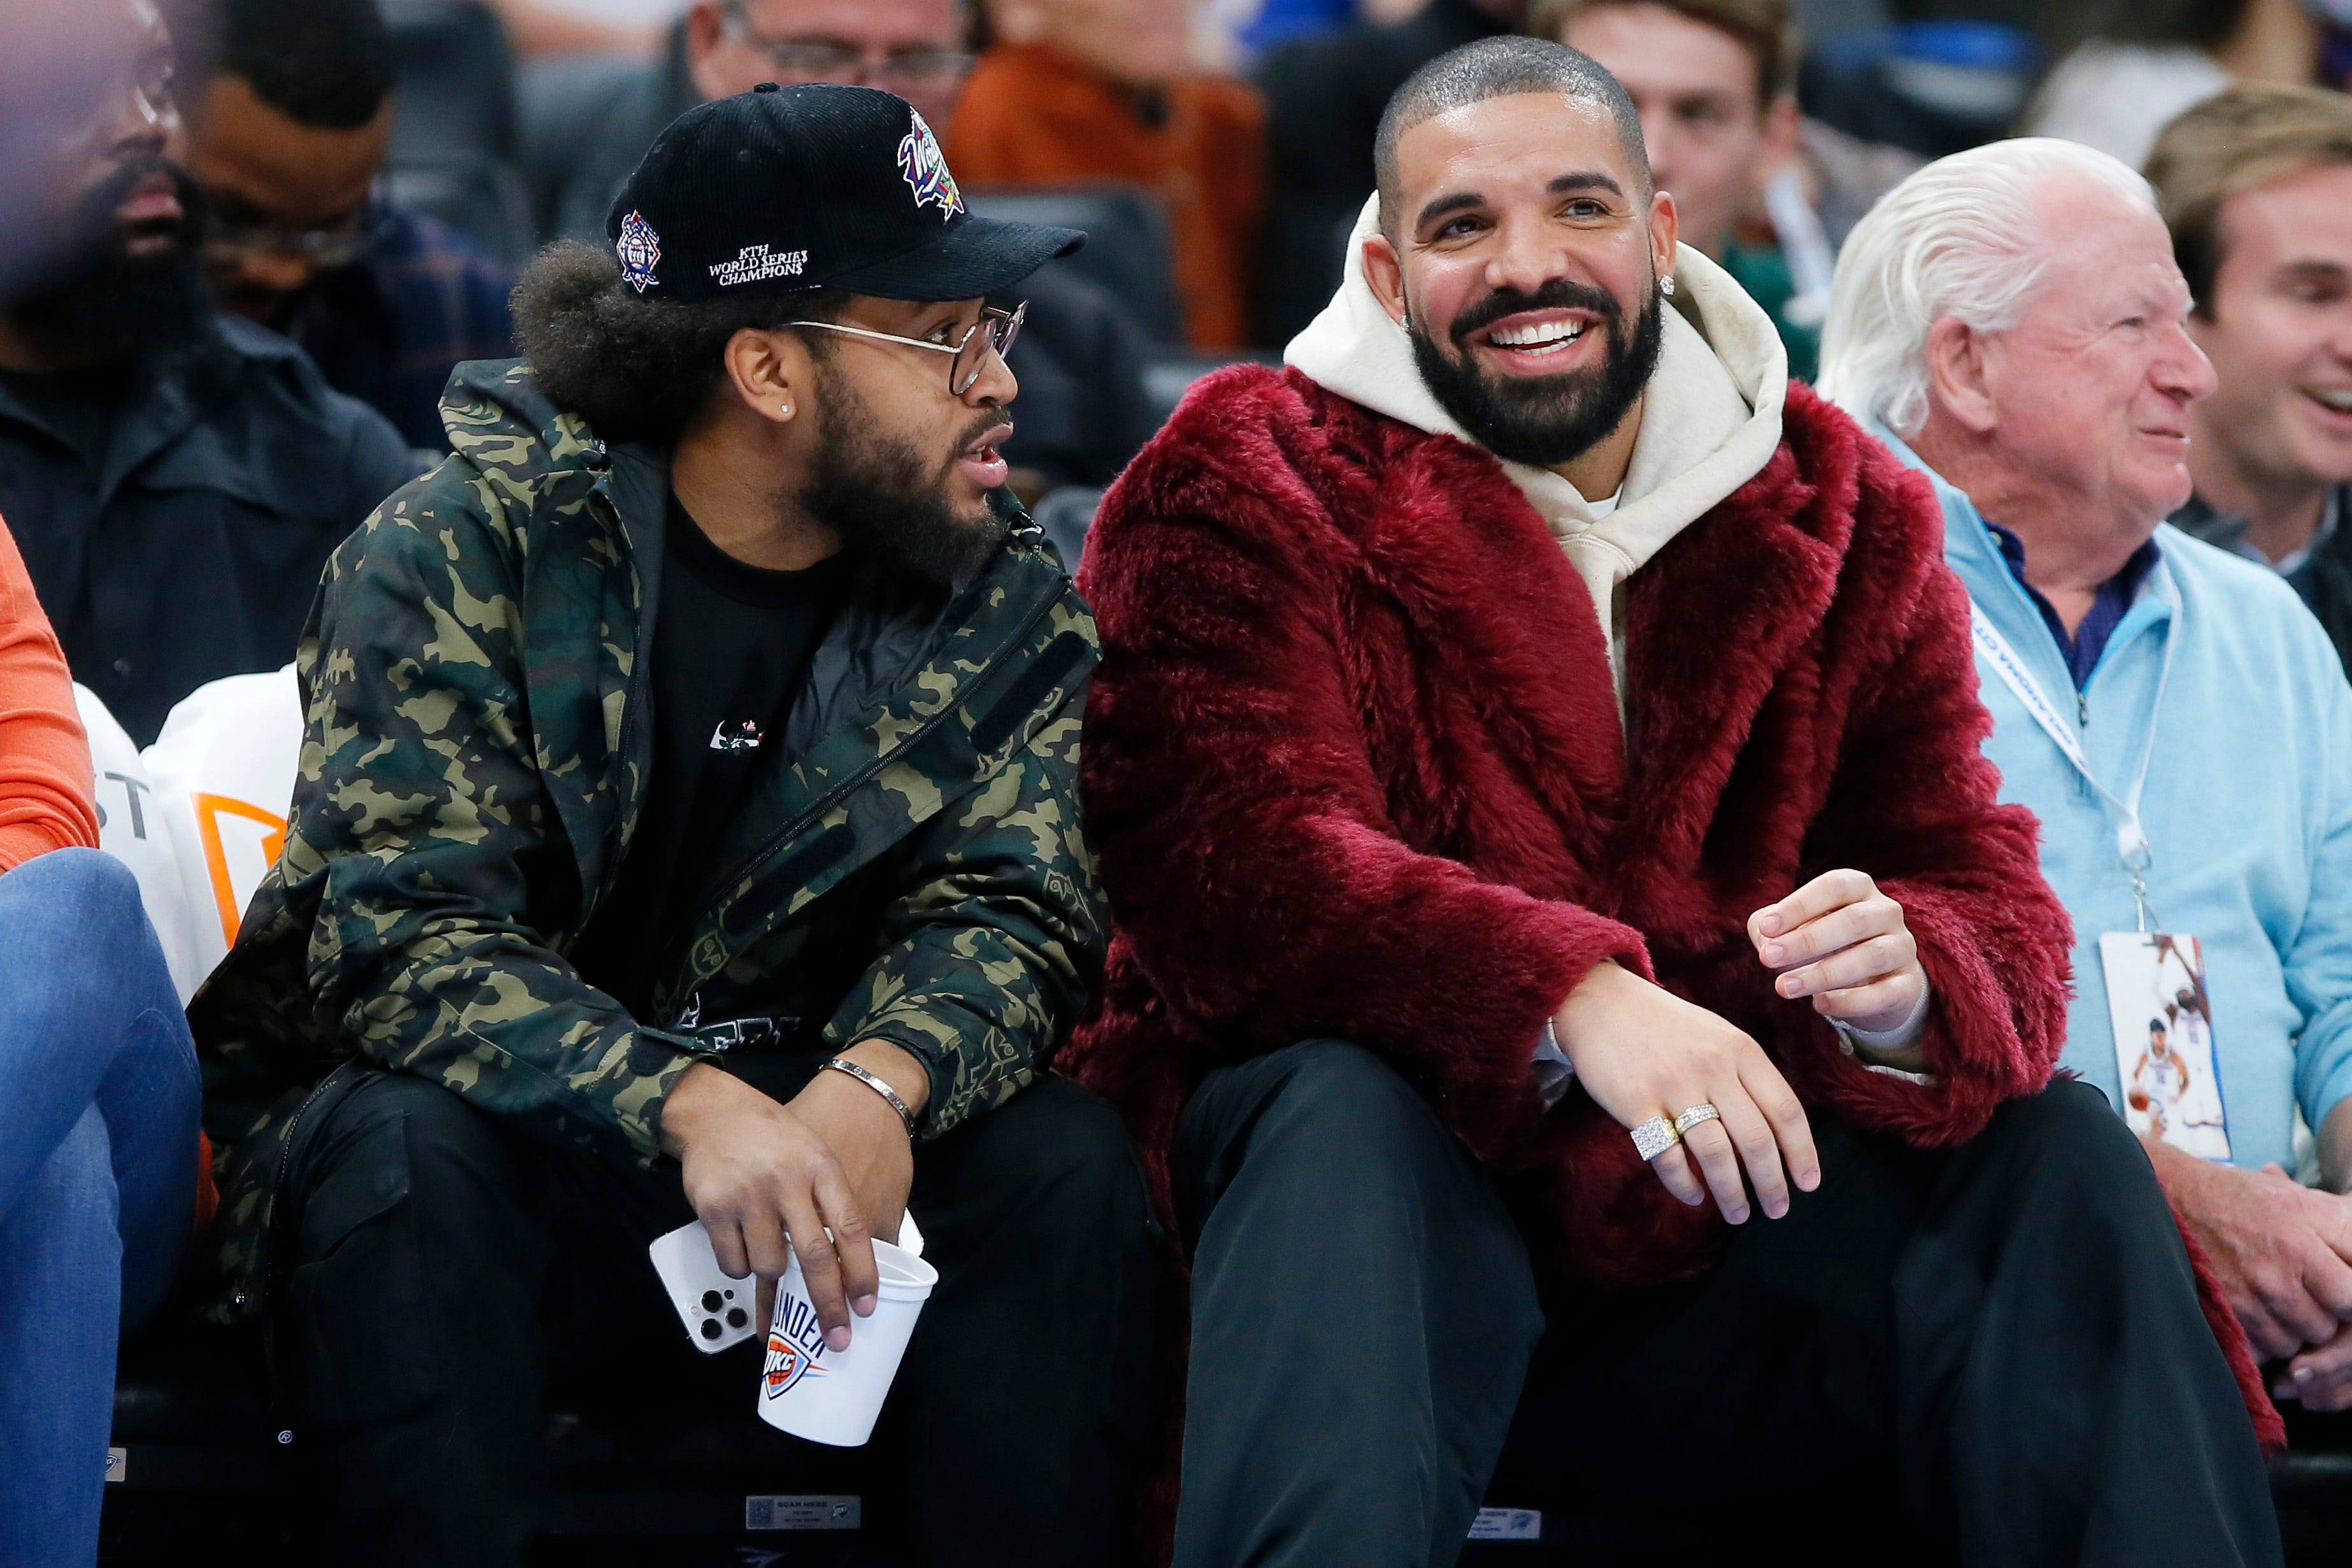 Oklahoma couple didn't know who Drake was until Thunder game. 'That's when my phone blew up' thumbnail